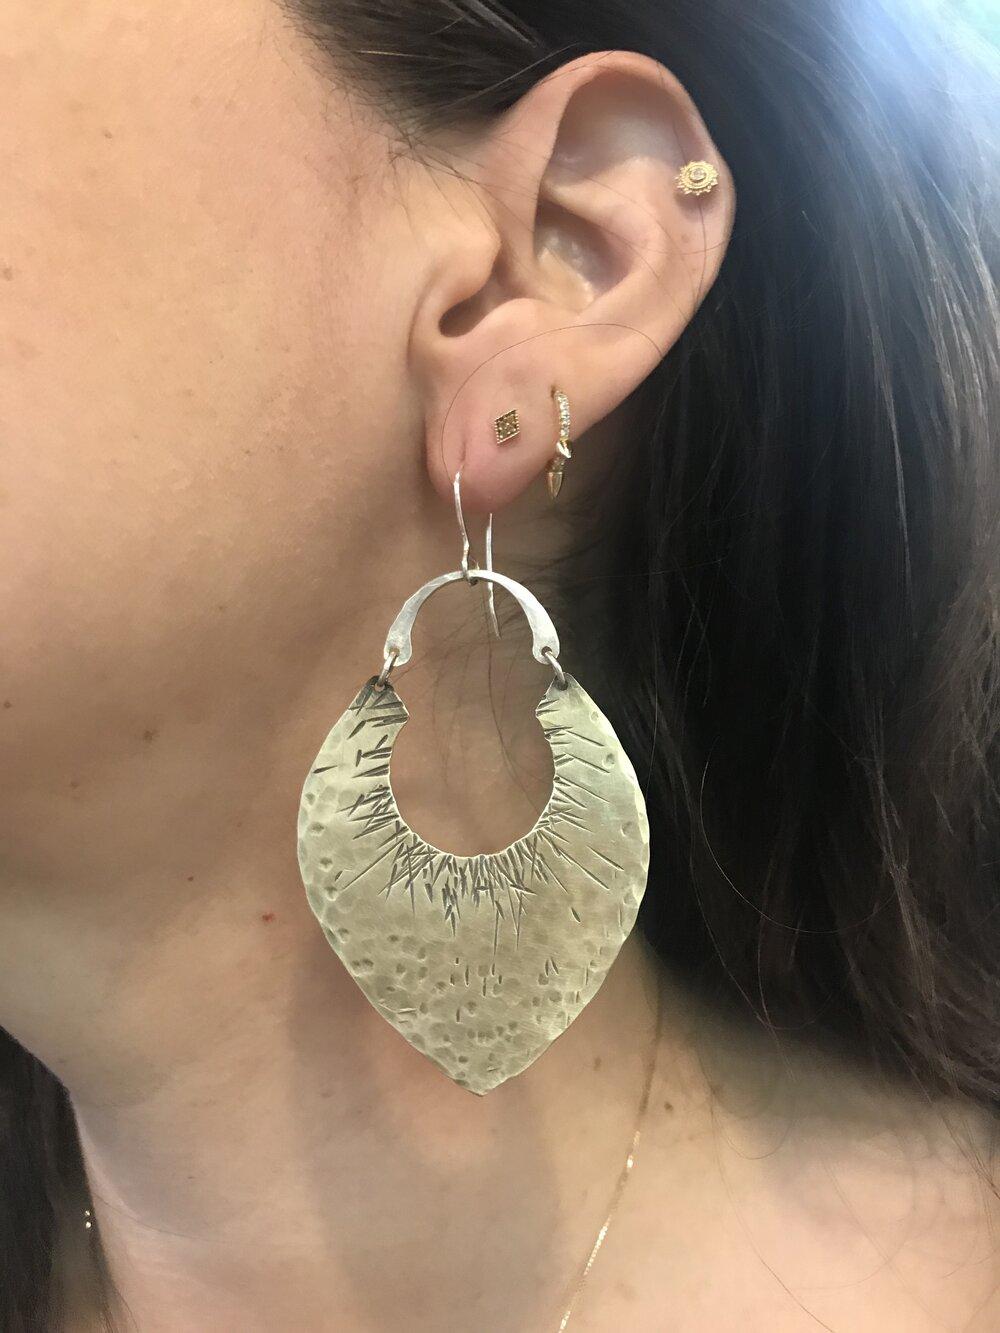 Statement Earrings and Hammering Skills - 3 hours